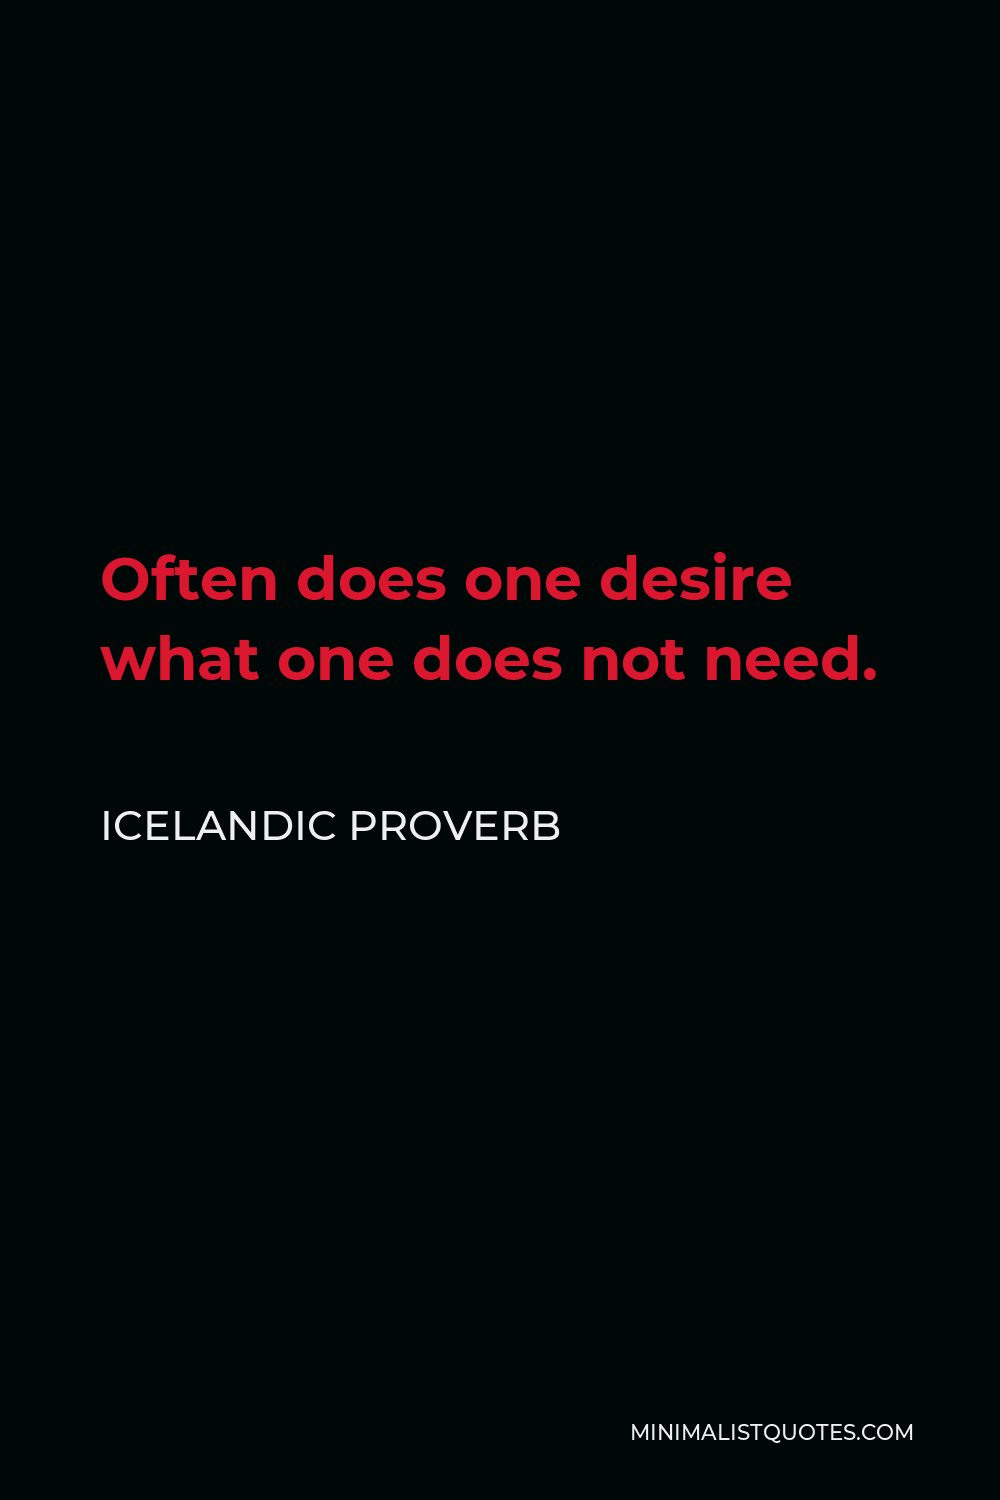 Icelandic Proverb Quote - Often does one desire what one does not need.